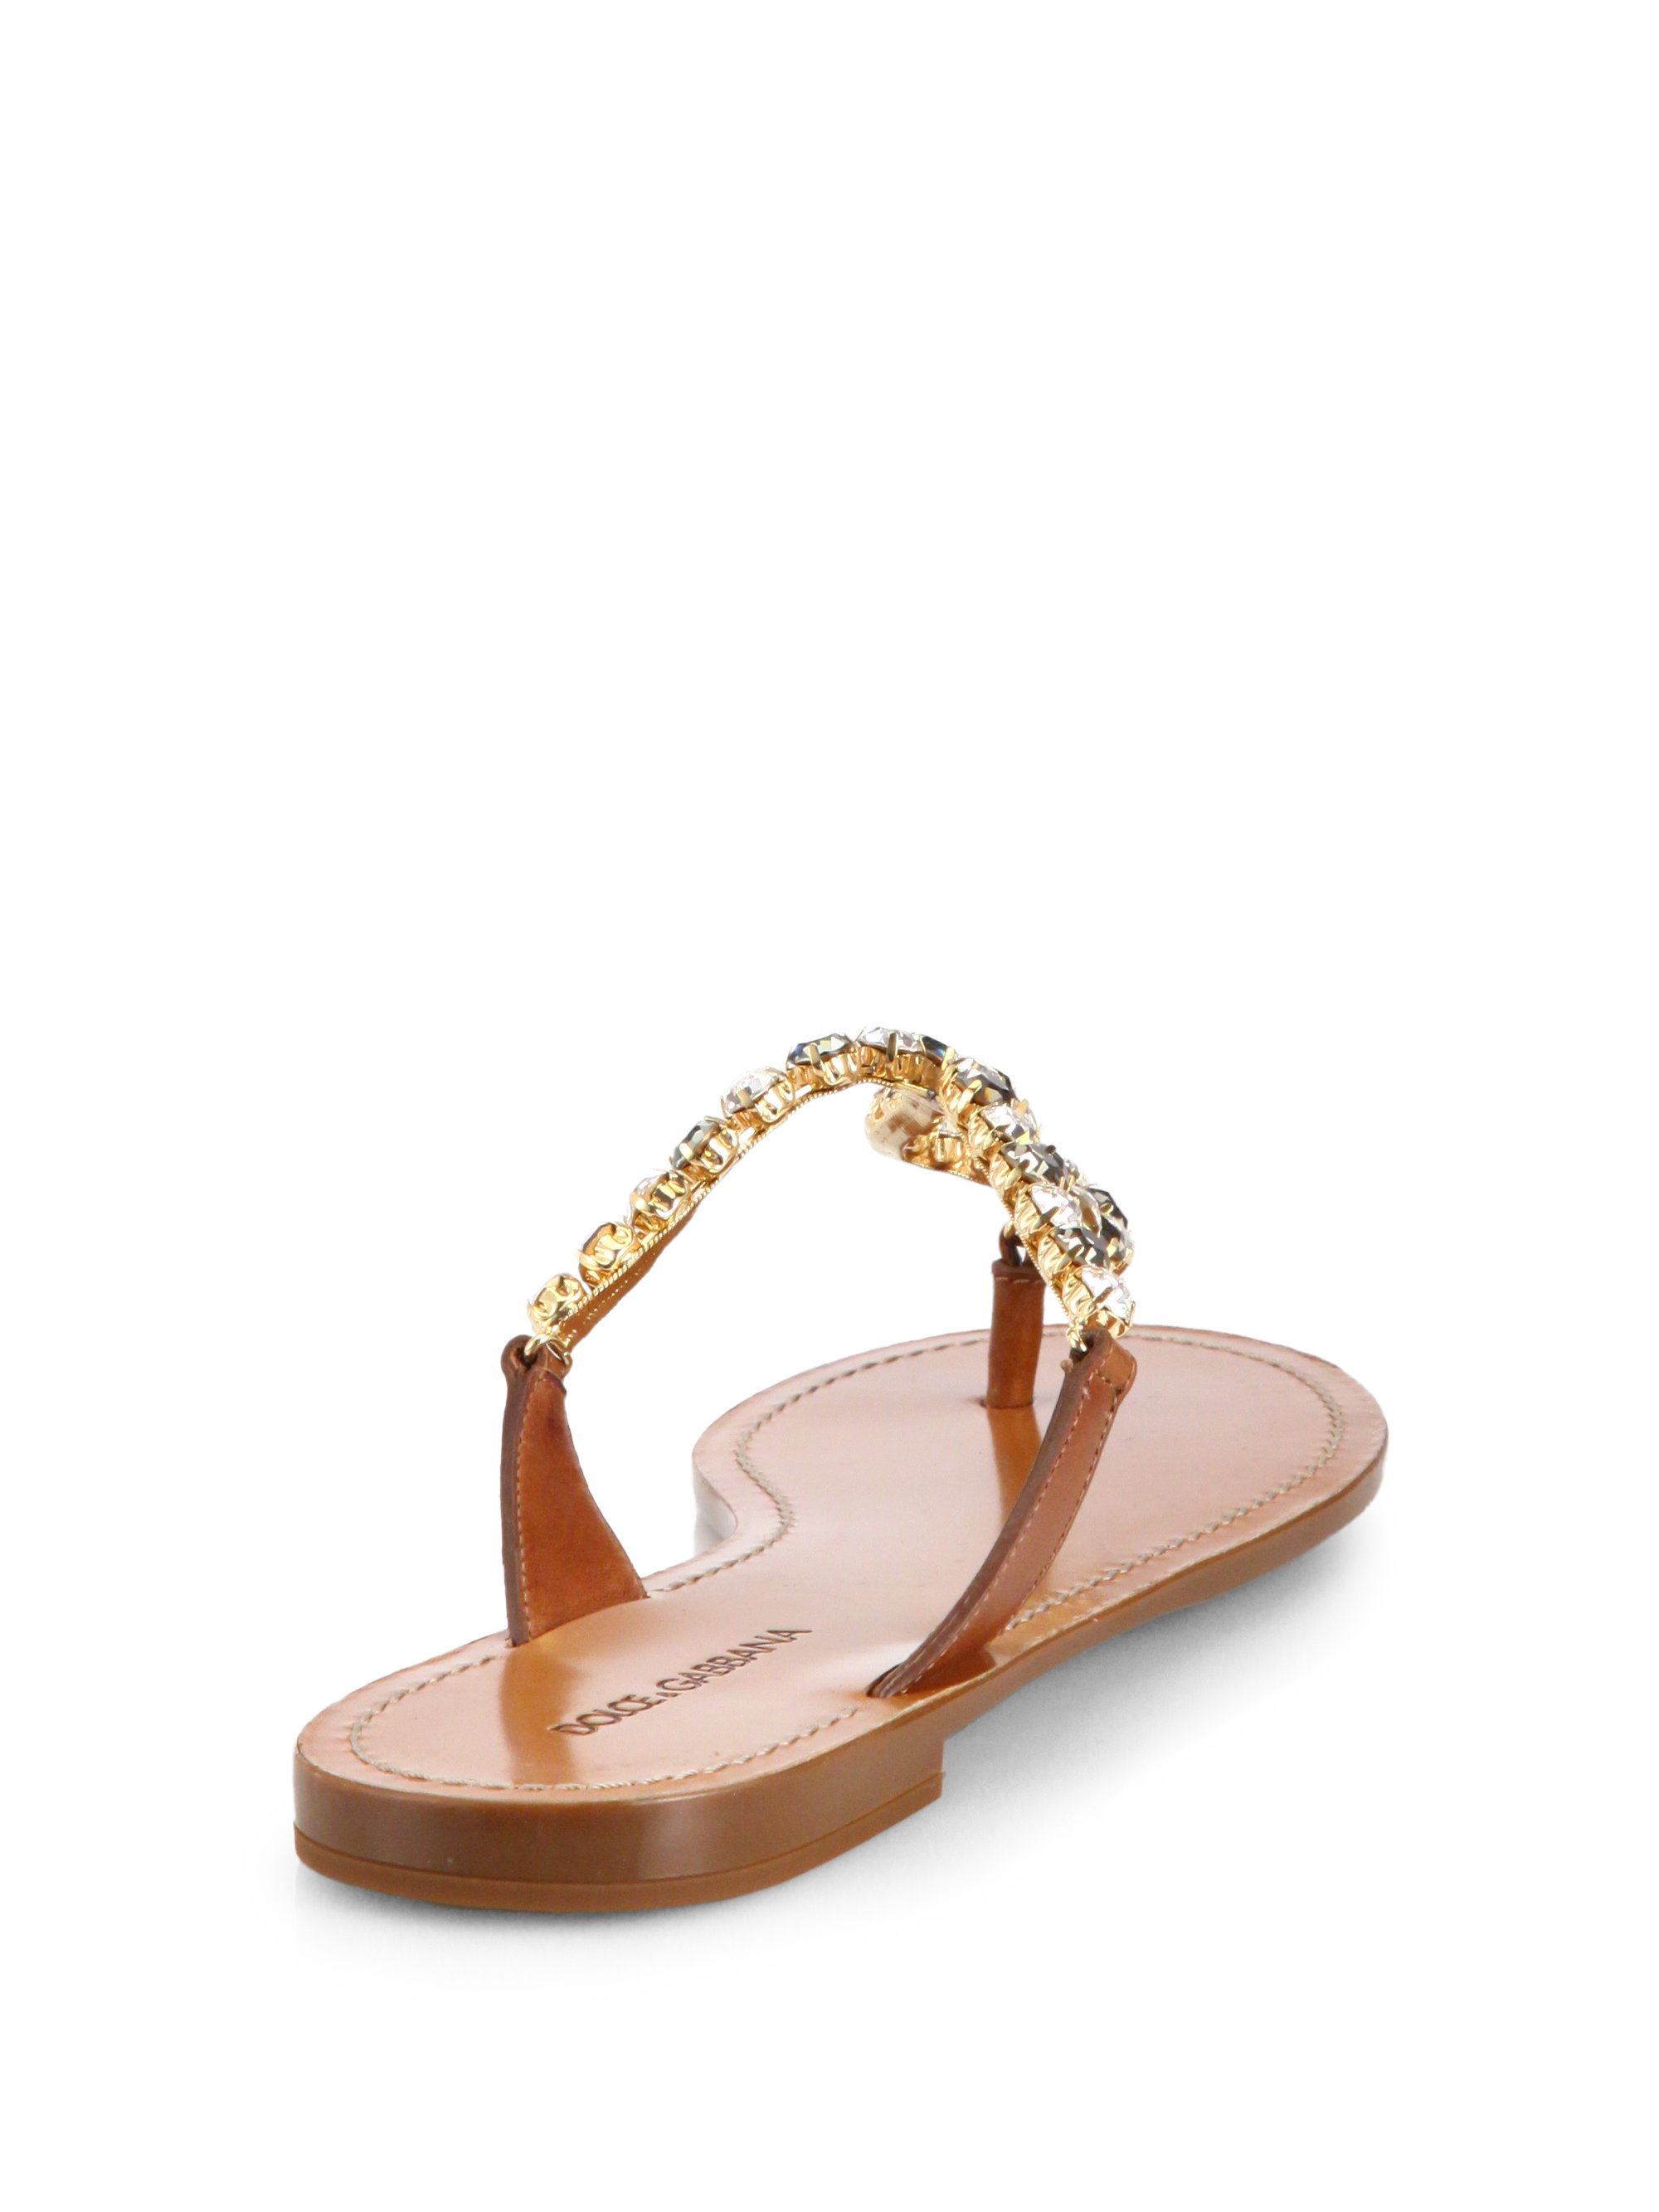 Lyst - Dolce & Gabbana Teardrop Jeweled Thong Sandals in Brown